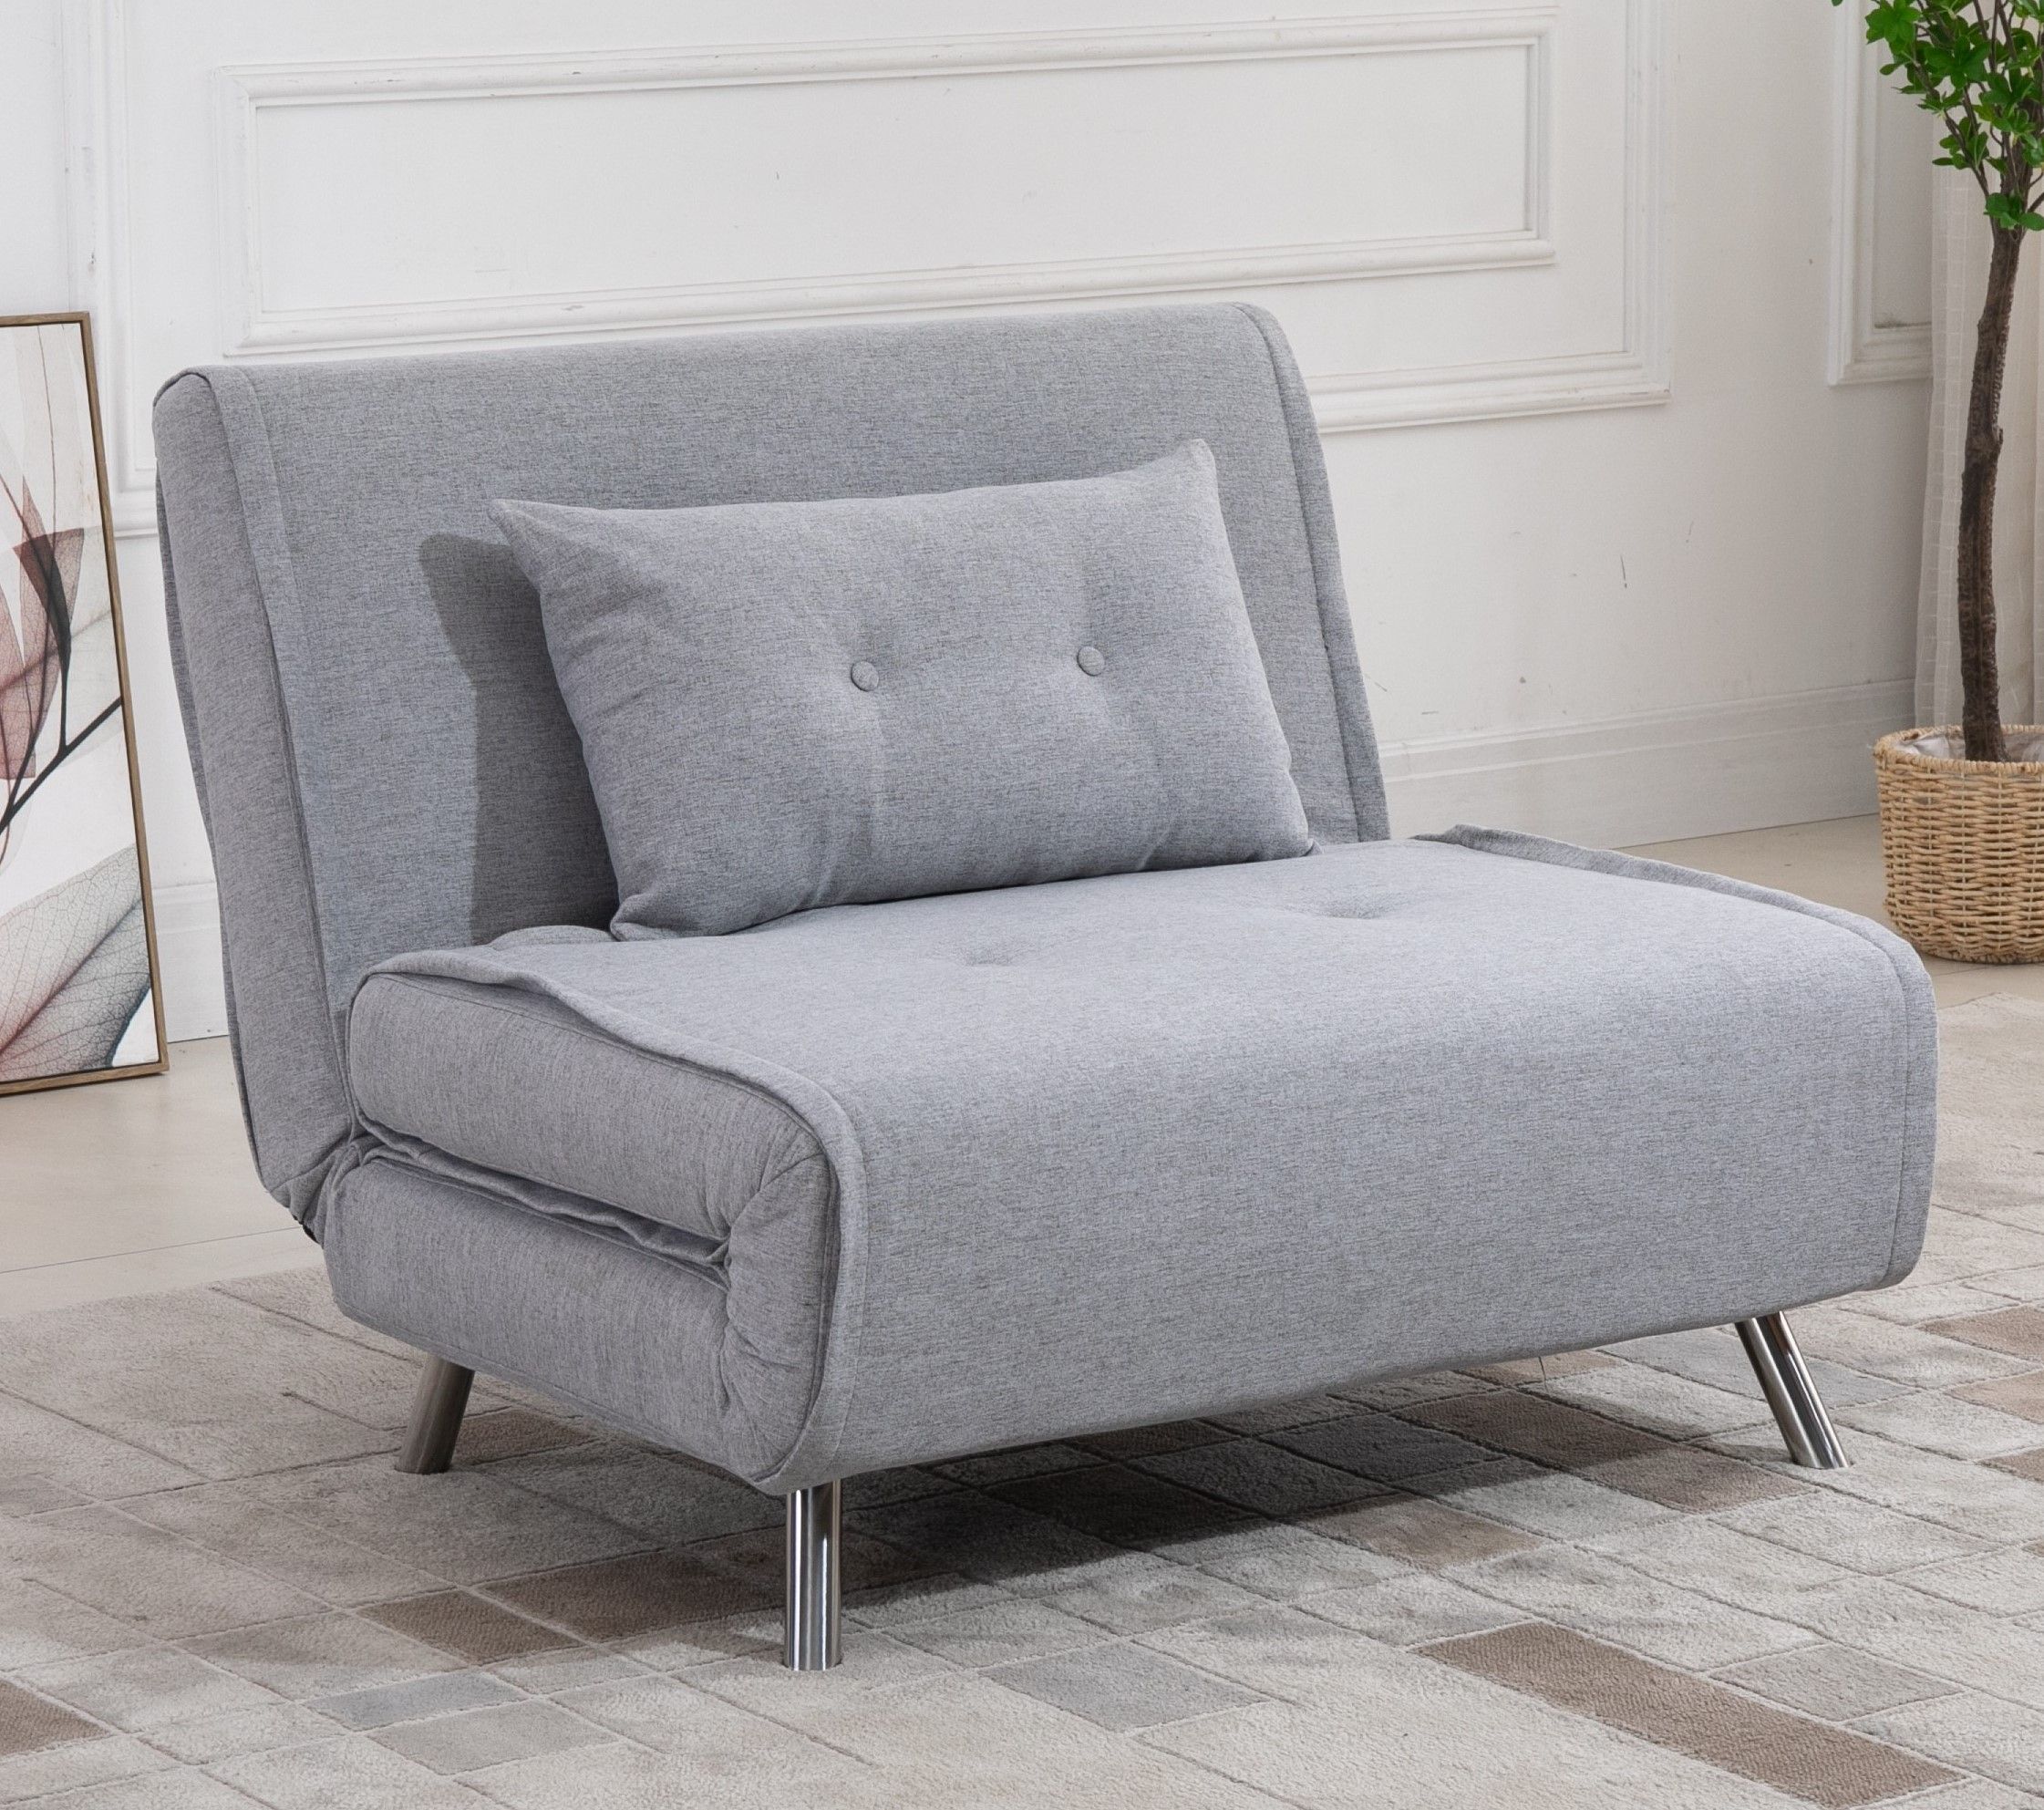 Wooden Frame Adjustable Sofa Bed Comfortable Chair 1 Seater Grey King Single Bed